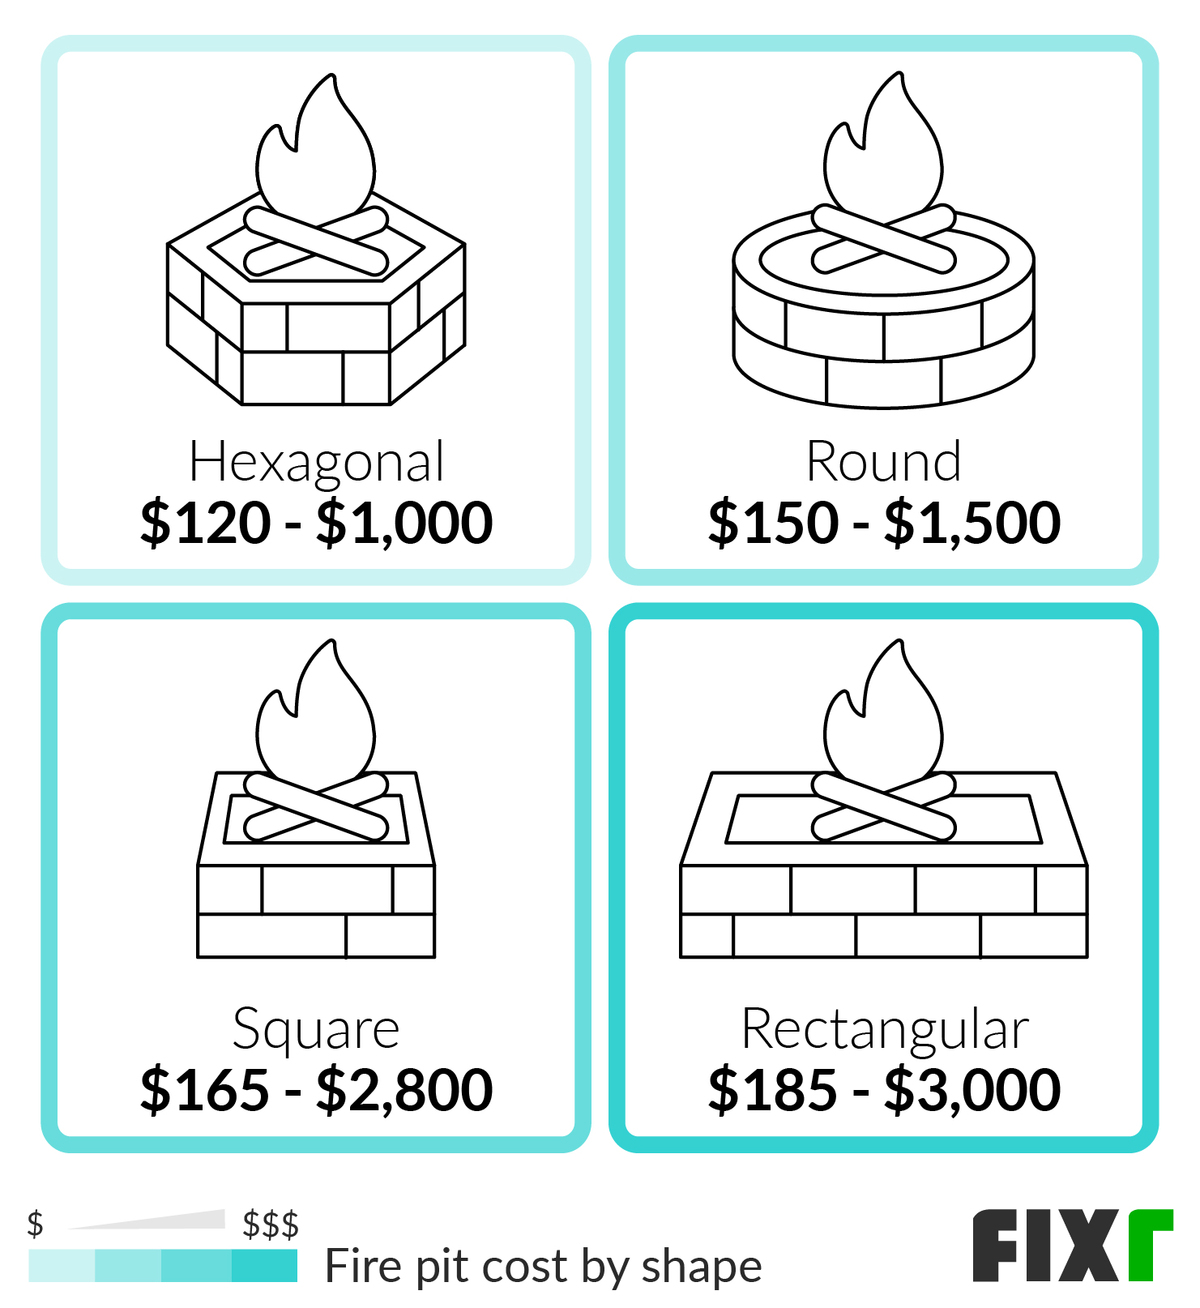 2021 Fire Pit Costs Cost To Build A, Fire Pit Cost